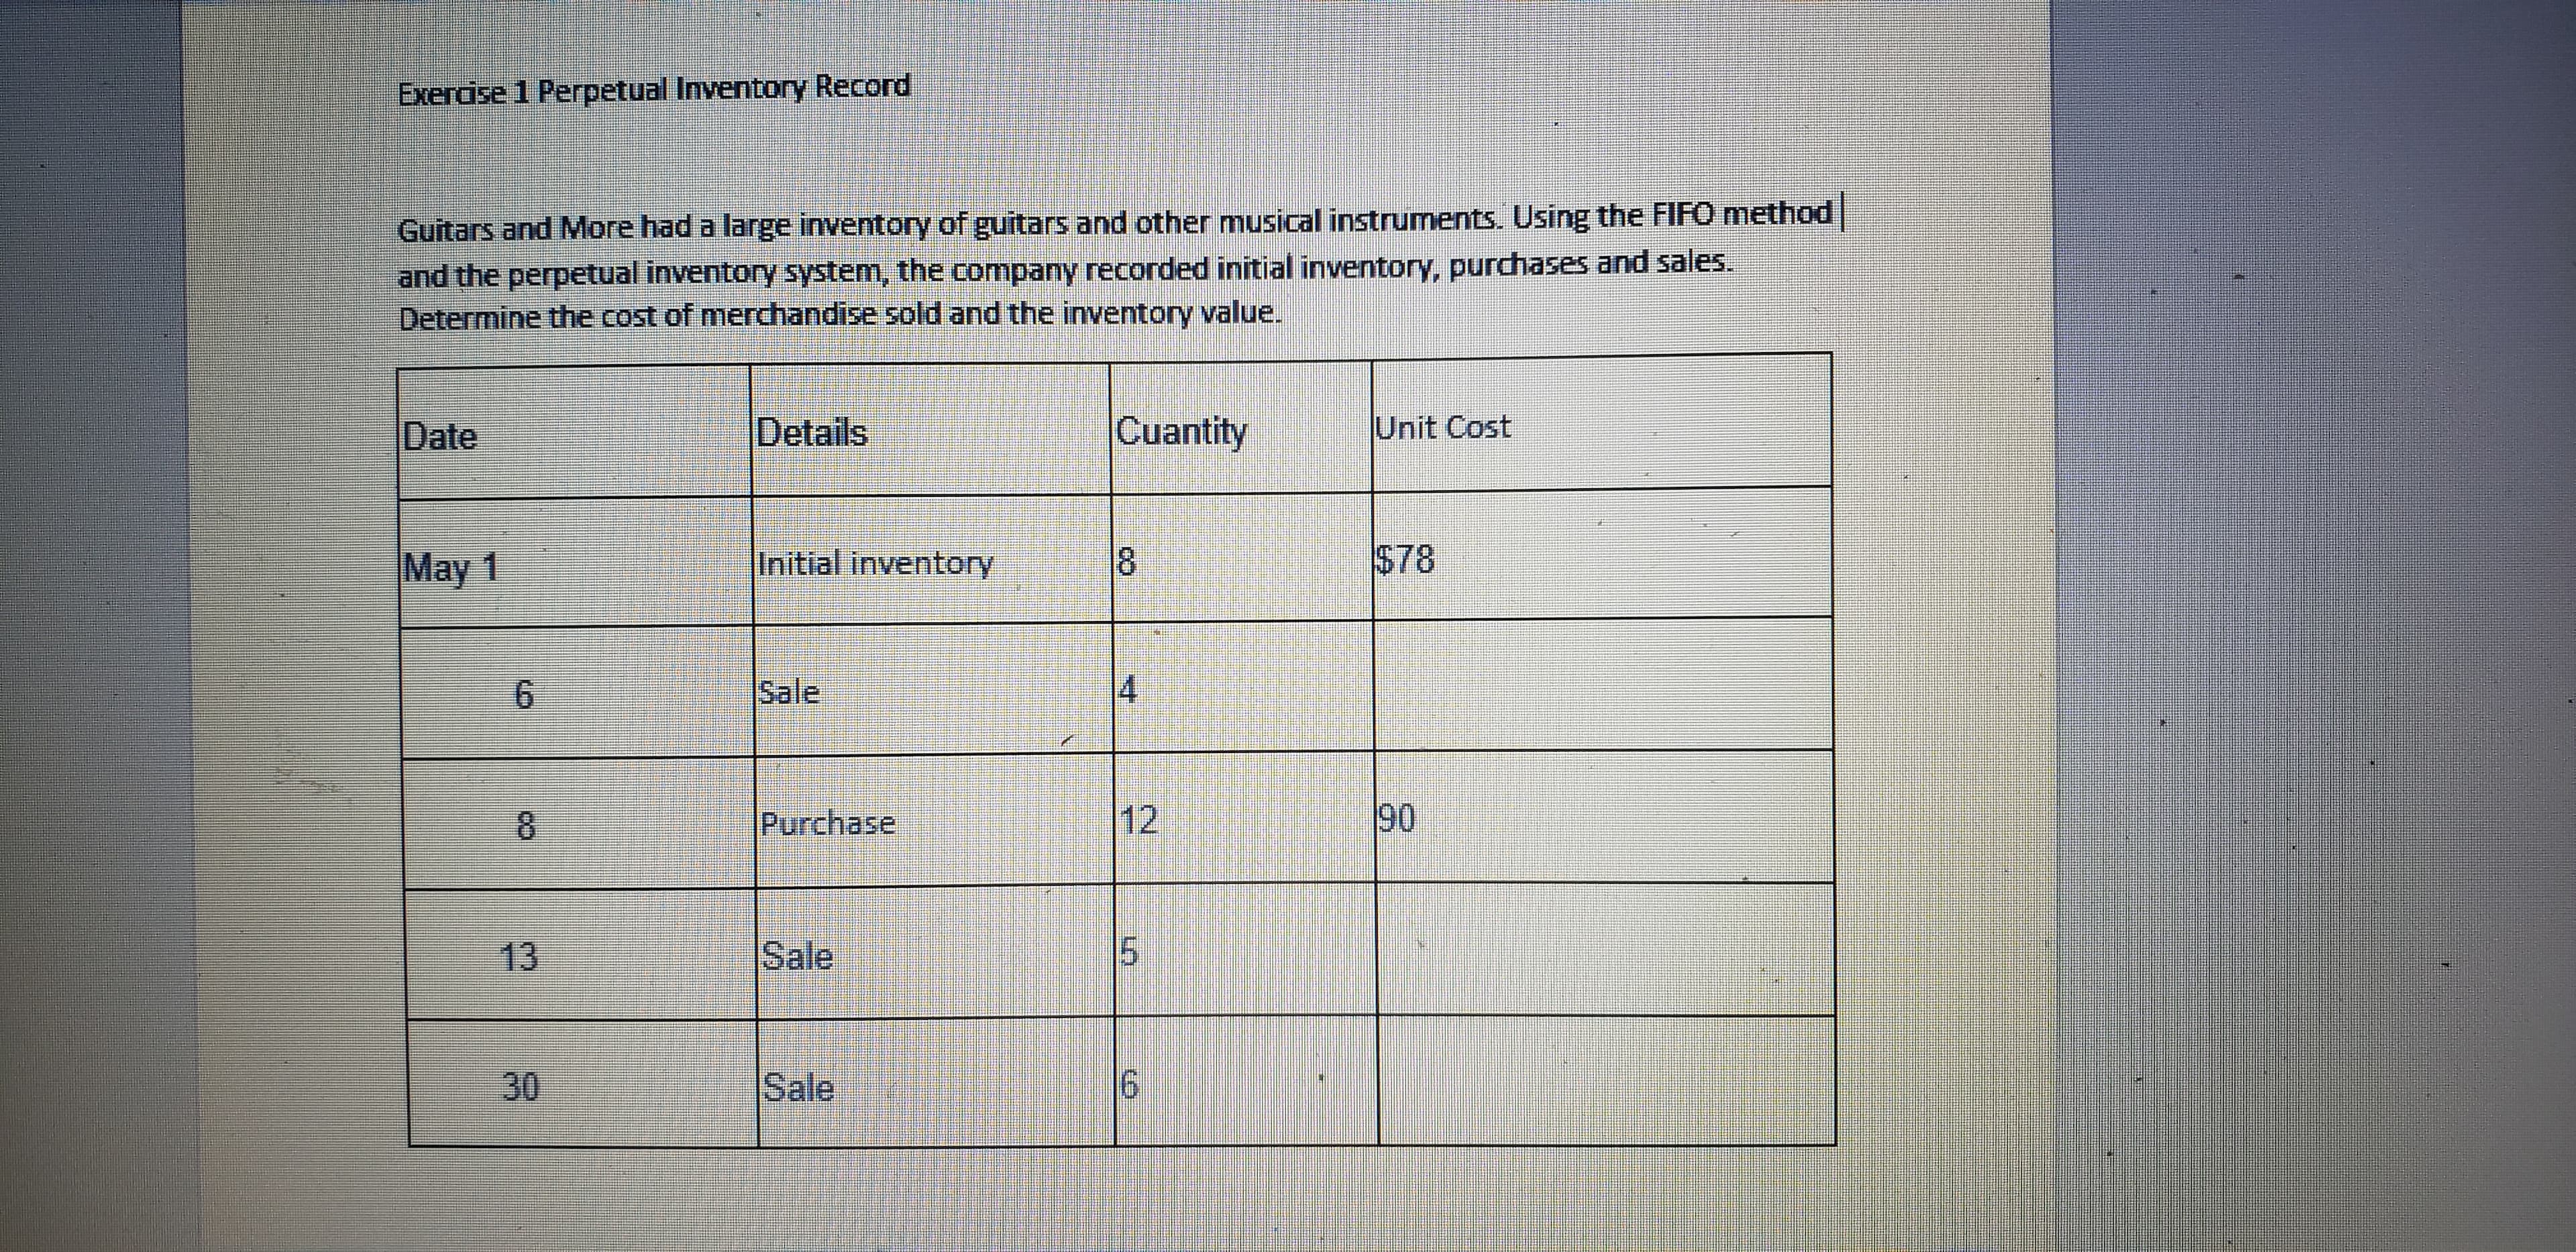 Exercise 1 Perpetual Inventory Record
Guitars and More had a large inventory of guitars and other musical instruments. Using the FIFO method
and the perpetual inventory system, the company recorded initial inventory, purchases and sales.
Determine the cost of merchandise sold and the inventory value.
Date
Details
Cuantity
Unit Cost
May 1
Initial inventory
$78
9.
Sale
14
|Pபோrchase
12
90
13
Sale
30
Sale
